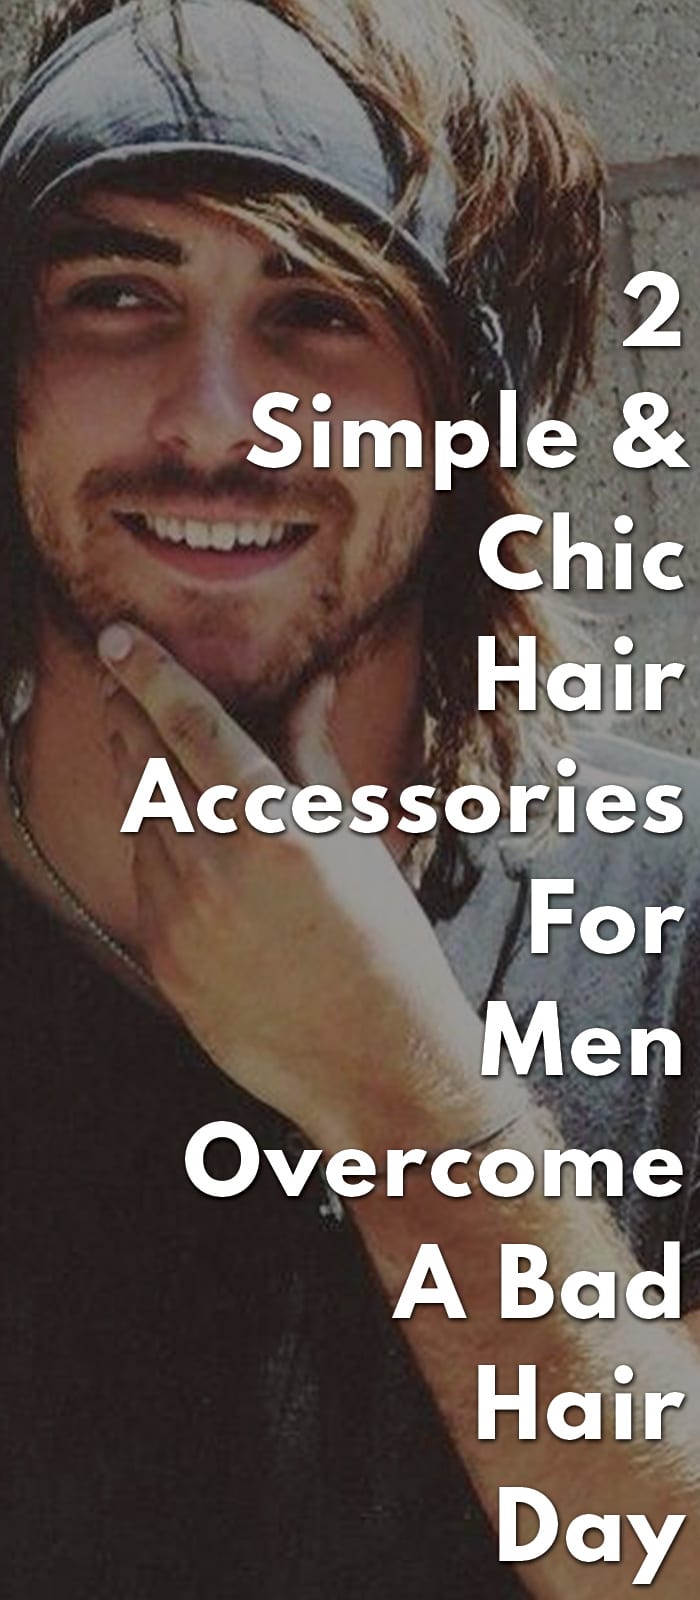 2-Simple-&-Chic-Hair-Accessories-For-Men-Overcome-A-Bad-Hair-Day